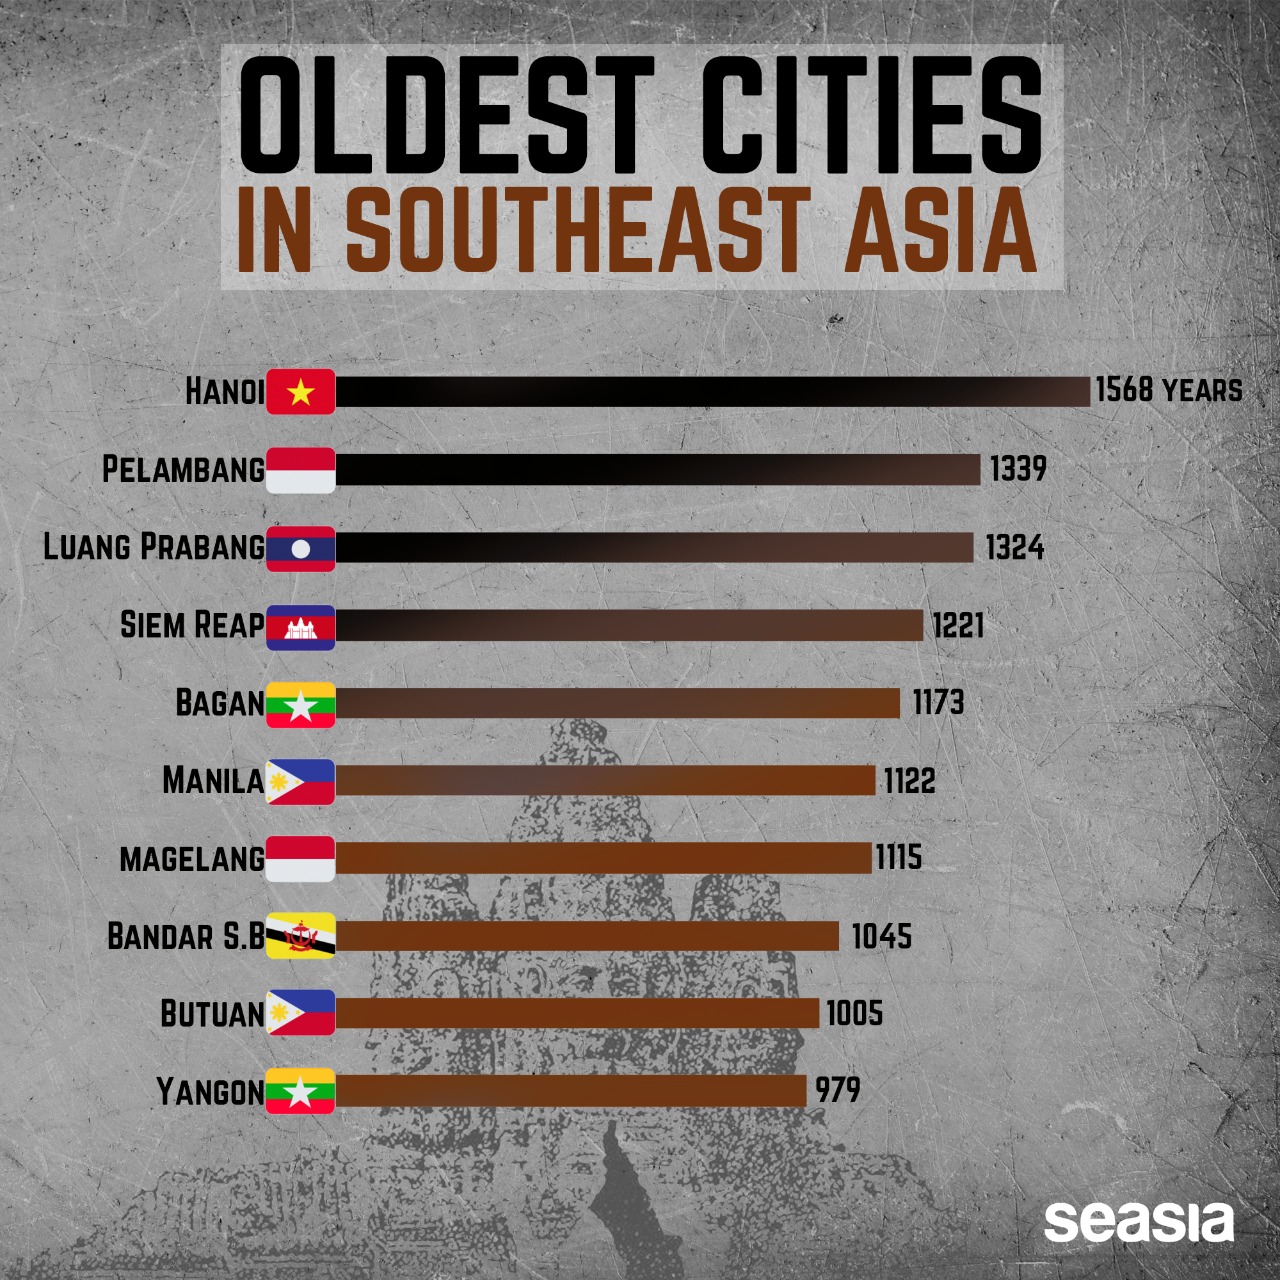 Which country is the oldest in Southeast Asia?